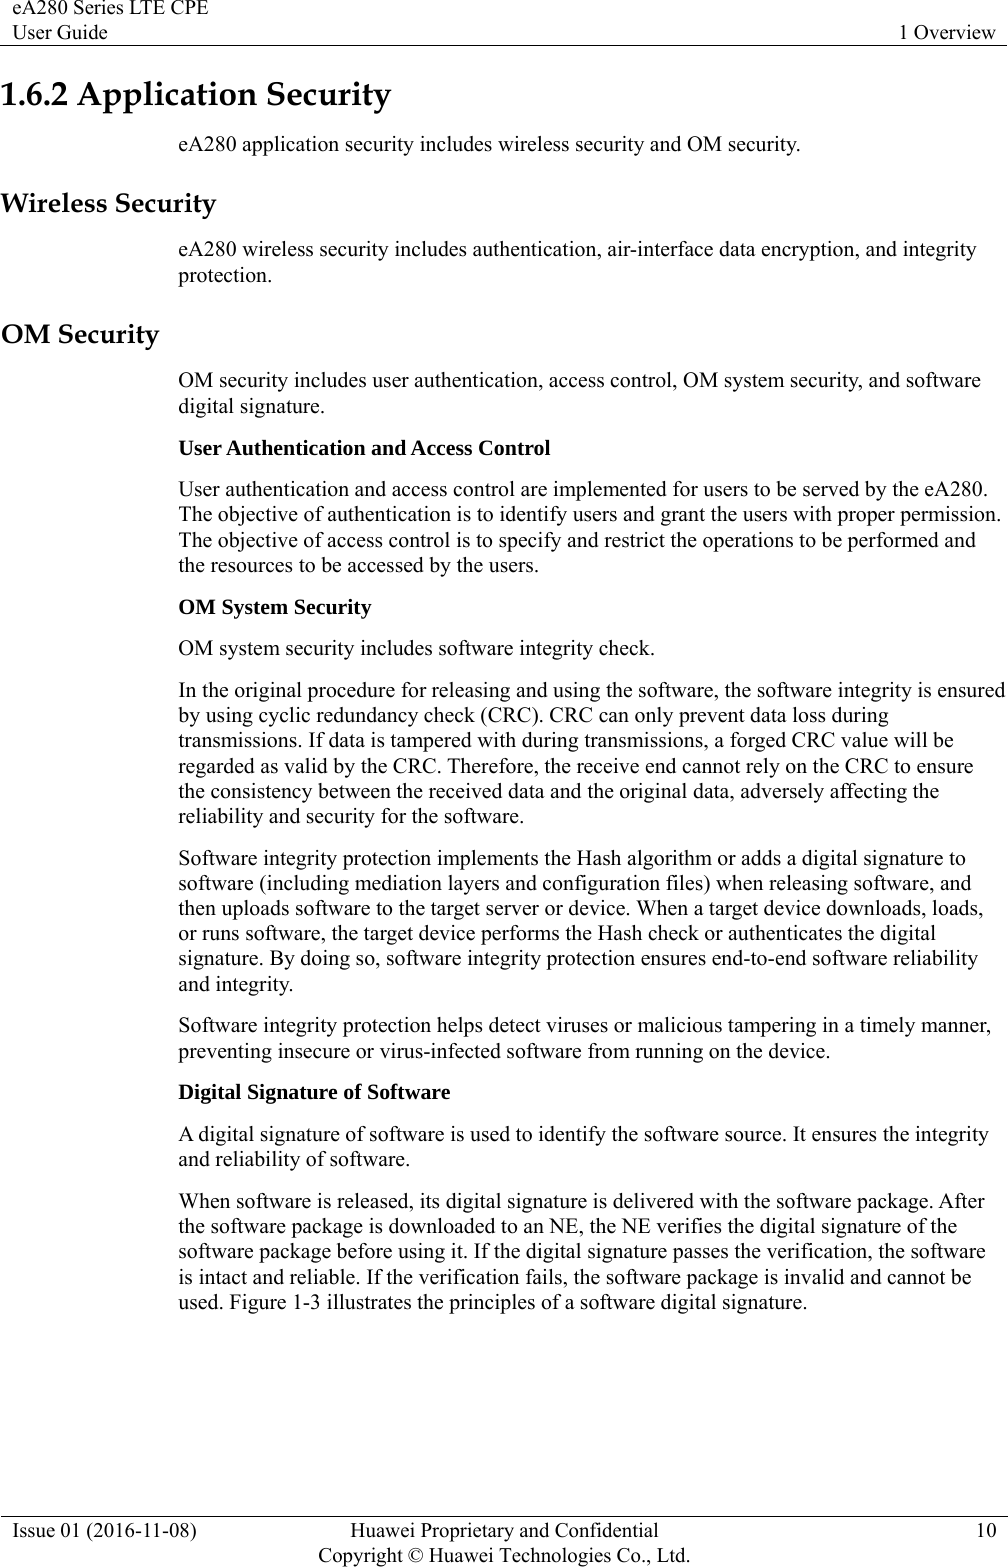 eA280 Series LTE CPE User Guide  1 Overview Issue 01 (2016-11-08)  Huawei Proprietary and Confidential         Copyright © Huawei Technologies Co., Ltd.10 1.6.2 Application Security eA280 application security includes wireless security and OM security. Wireless Security eA280 wireless security includes authentication, air-interface data encryption, and integrity protection. OM Security OM security includes user authentication, access control, OM system security, and software digital signature. User Authentication and Access Control User authentication and access control are implemented for users to be served by the eA280. The objective of authentication is to identify users and grant the users with proper permission. The objective of access control is to specify and restrict the operations to be performed and the resources to be accessed by the users. OM System Security OM system security includes software integrity check. In the original procedure for releasing and using the software, the software integrity is ensured by using cyclic redundancy check (CRC). CRC can only prevent data loss during transmissions. If data is tampered with during transmissions, a forged CRC value will be regarded as valid by the CRC. Therefore, the receive end cannot rely on the CRC to ensure the consistency between the received data and the original data, adversely affecting the reliability and security for the software. Software integrity protection implements the Hash algorithm or adds a digital signature to software (including mediation layers and configuration files) when releasing software, and then uploads software to the target server or device. When a target device downloads, loads, or runs software, the target device performs the Hash check or authenticates the digital signature. By doing so, software integrity protection ensures end-to-end software reliability and integrity. Software integrity protection helps detect viruses or malicious tampering in a timely manner, preventing insecure or virus-infected software from running on the device. Digital Signature of Software A digital signature of software is used to identify the software source. It ensures the integrity and reliability of software.   When software is released, its digital signature is delivered with the software package. After the software package is downloaded to an NE, the NE verifies the digital signature of the software package before using it. If the digital signature passes the verification, the software is intact and reliable. If the verification fails, the software package is invalid and cannot be used. Figure 1-3 illustrates the principles of a software digital signature. 